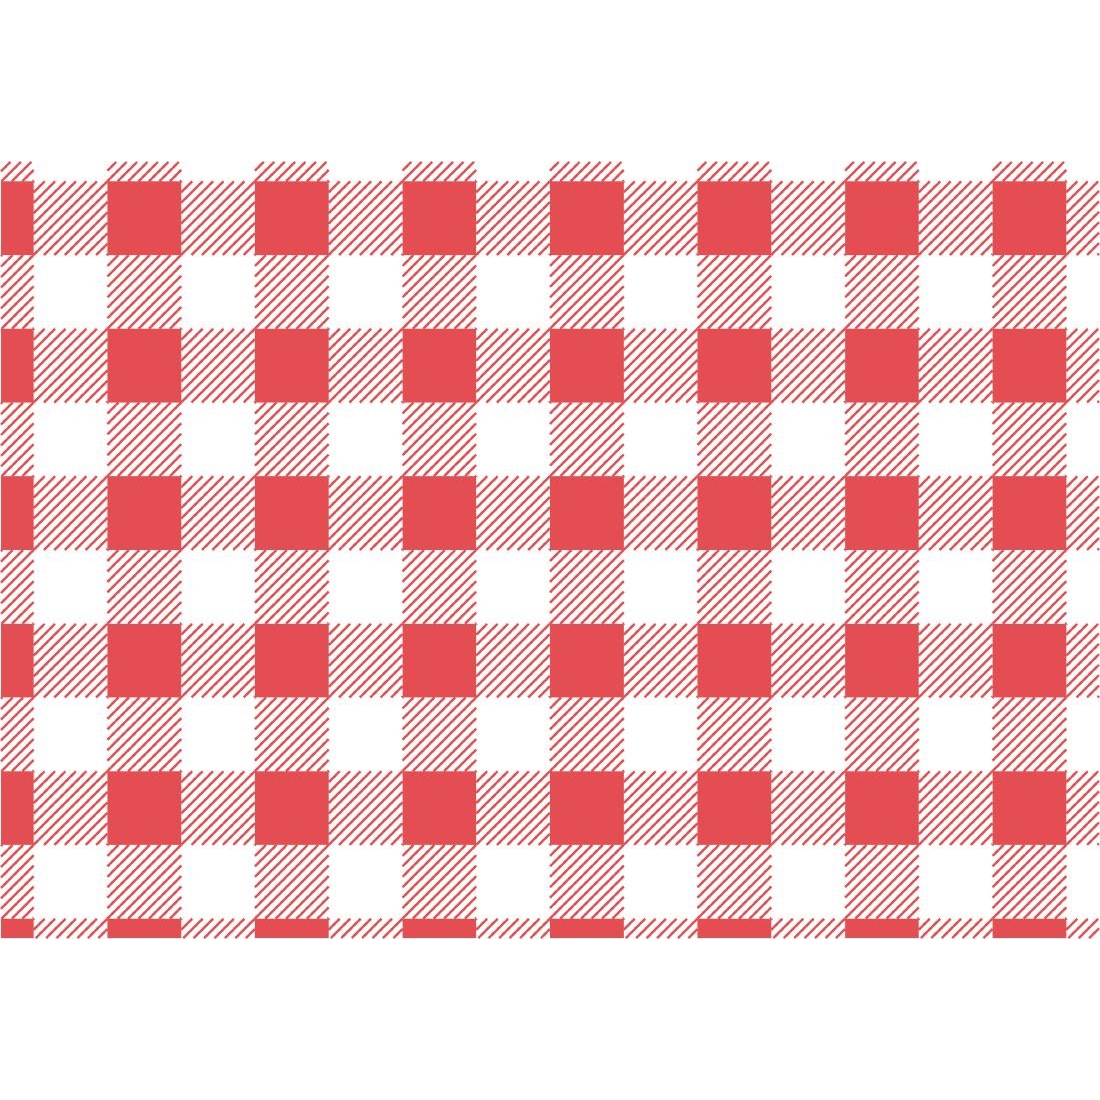 Red Gingham Greaseproof Paper 250x250mm by Non Branded-CL657